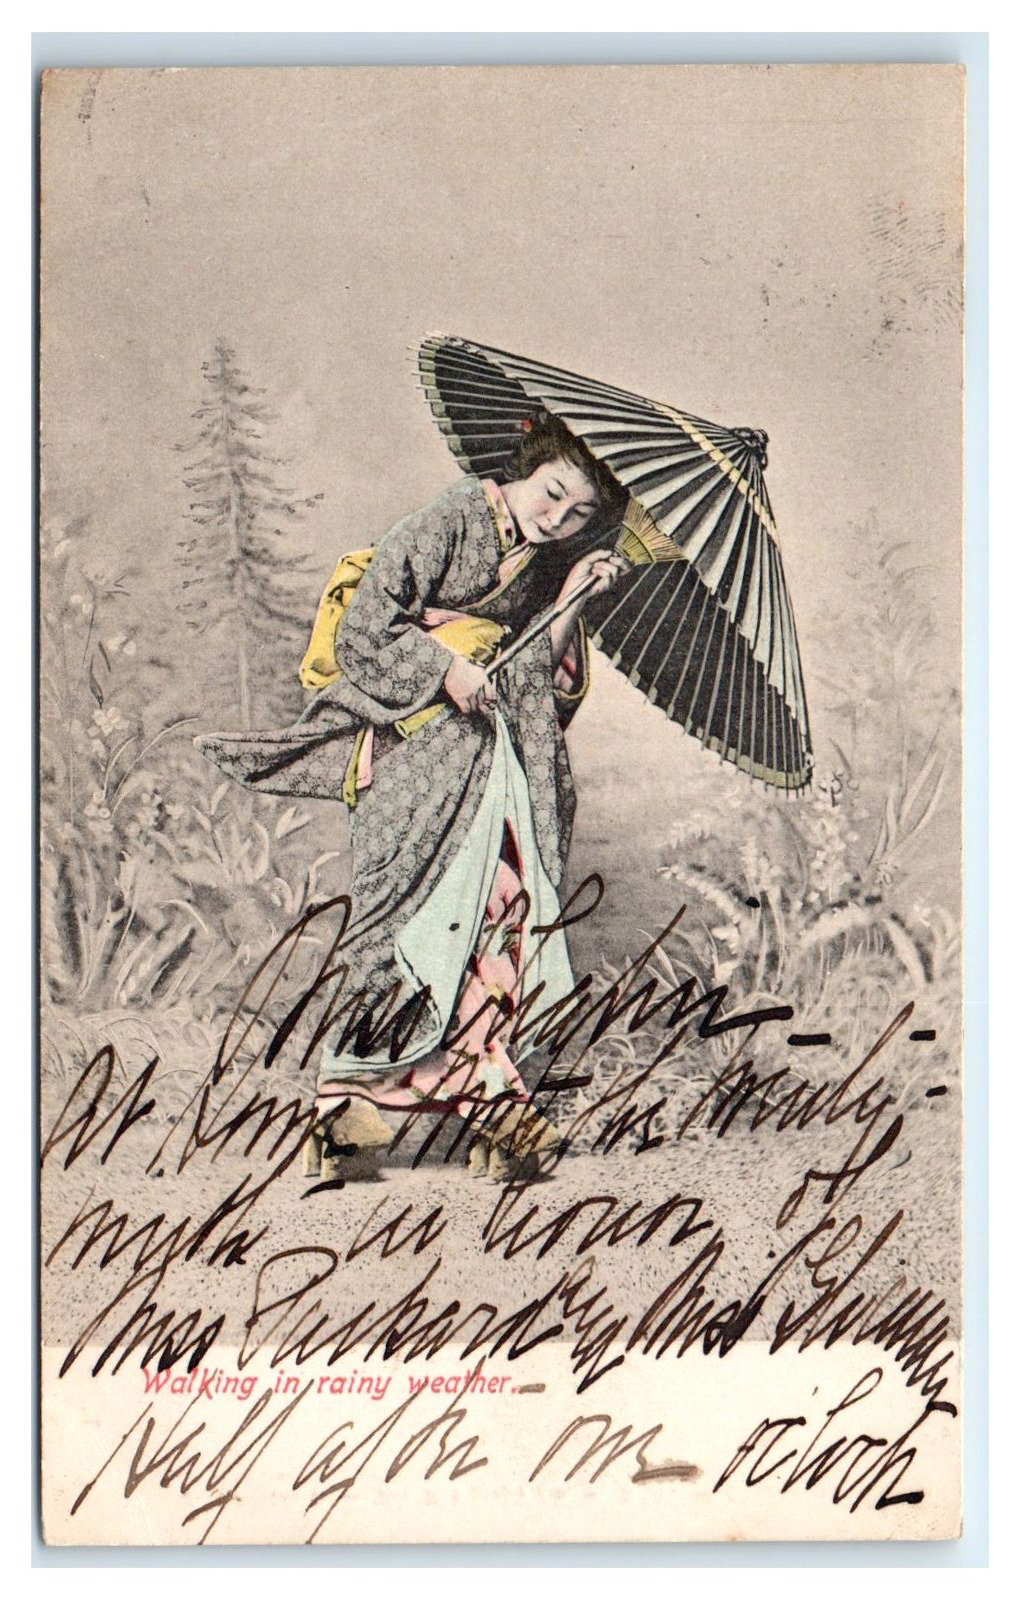 1905 Japanese Woman Postcard- WOMAN CARRYING UMBRELLA against Wind - ROTOGRAPH